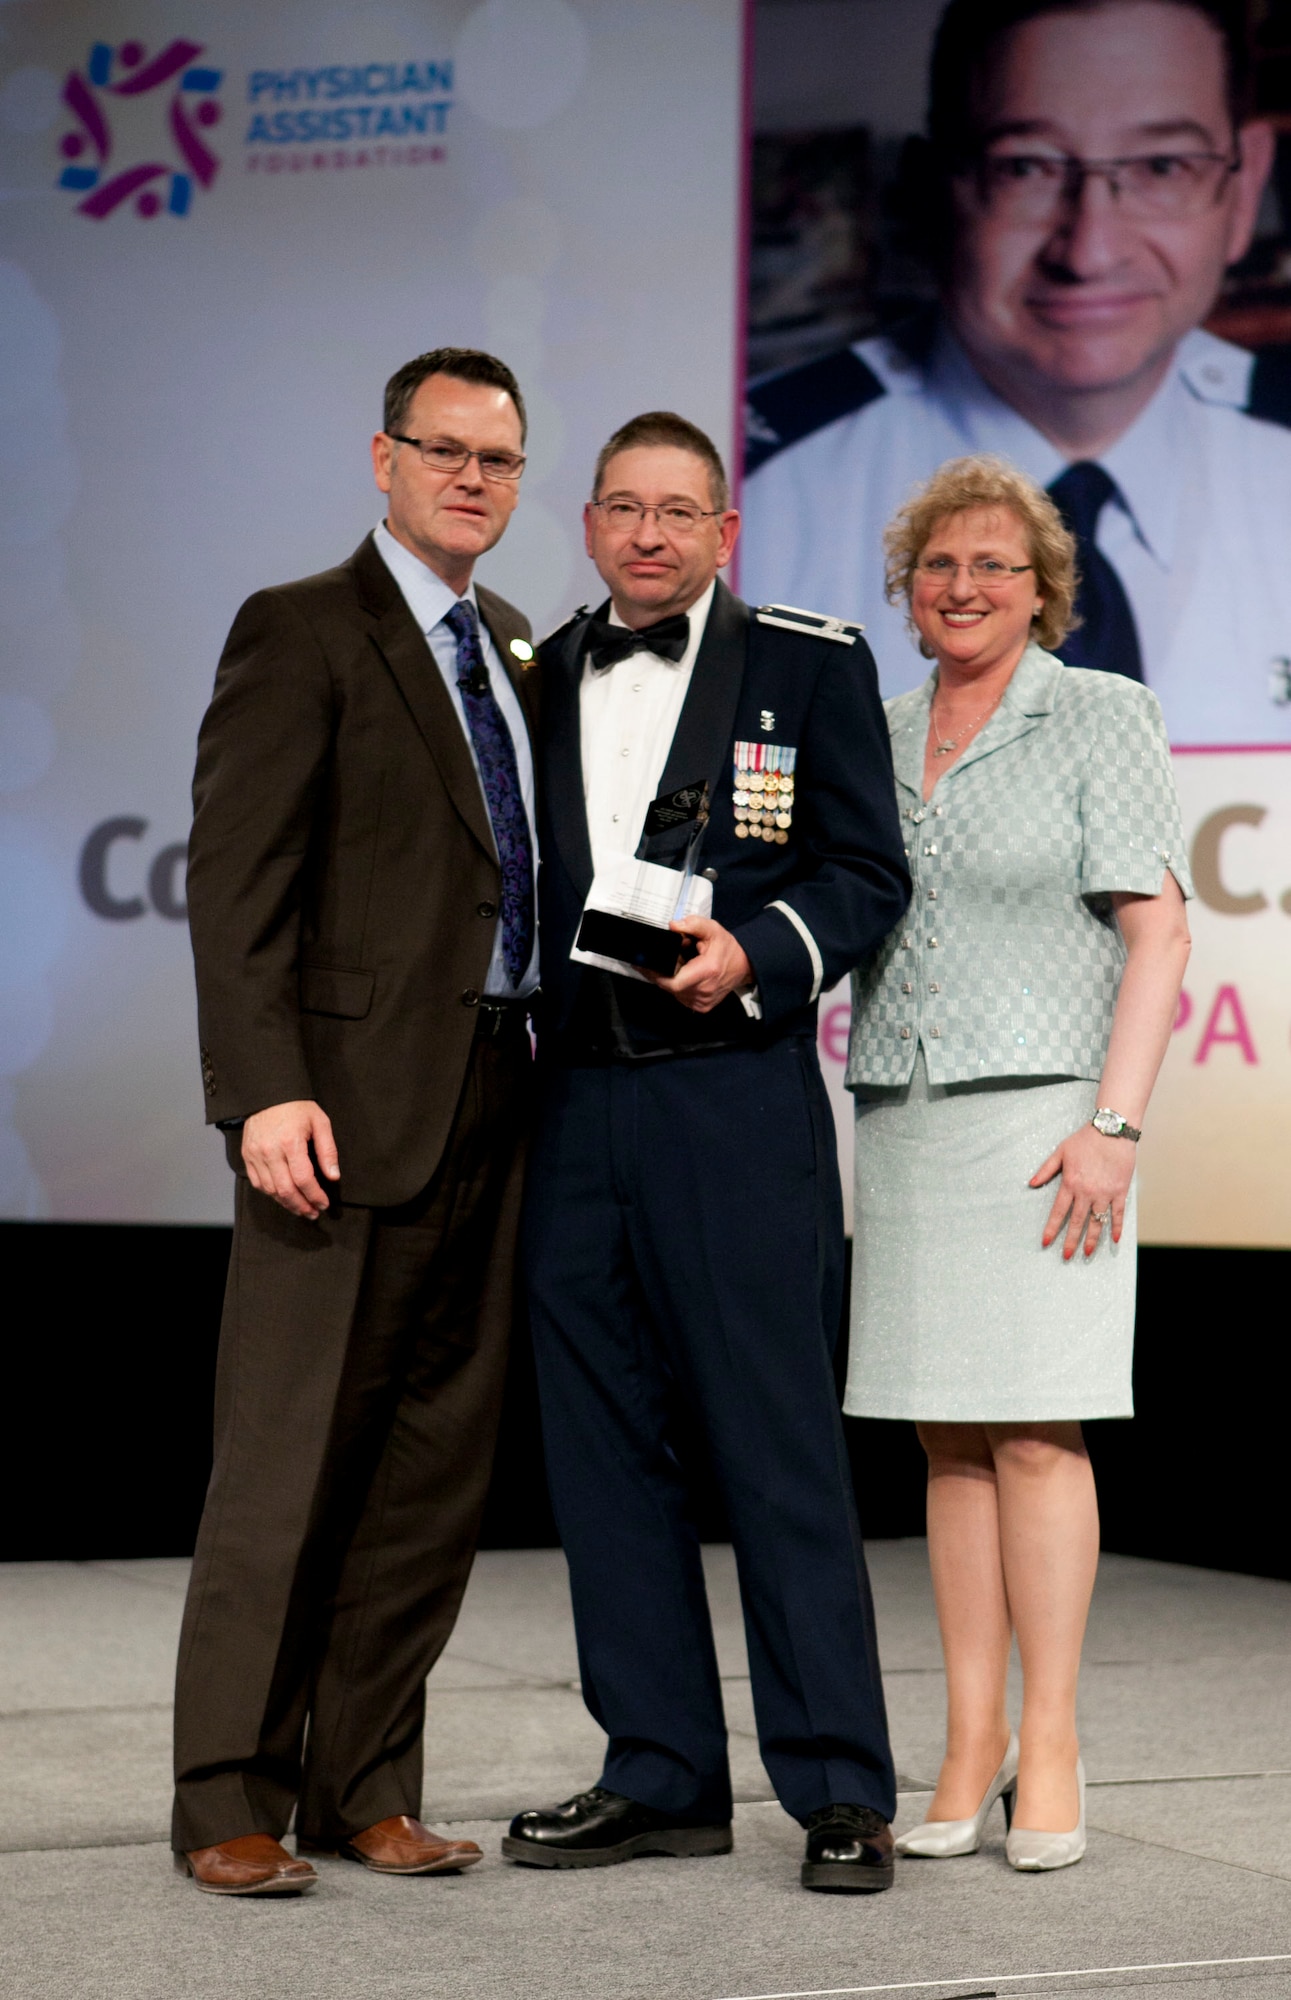 Colonel Douglas Hodge (center), Deputy Director of the Human Effectiveness Directorate, 711th Human Performance Wing, Air Force Research Laboratory at Wright-Patterson Air Force Base, Ohio, received the American Academy of Physician Assistants’ 2011 Federal Service PA of the Year Award at the organization’s conference on June 1 in Las Vegas. Patrick Killeen (left), President, American Academy of Physician Assistants, and Dr. Roslyn Schneider (right), Chief of Staff of the Medicines Development Group, Primary Care Business Unit, Pfizer Inc. and Physician Assistant Foundation trustee, present Colonel Hodge with his award.